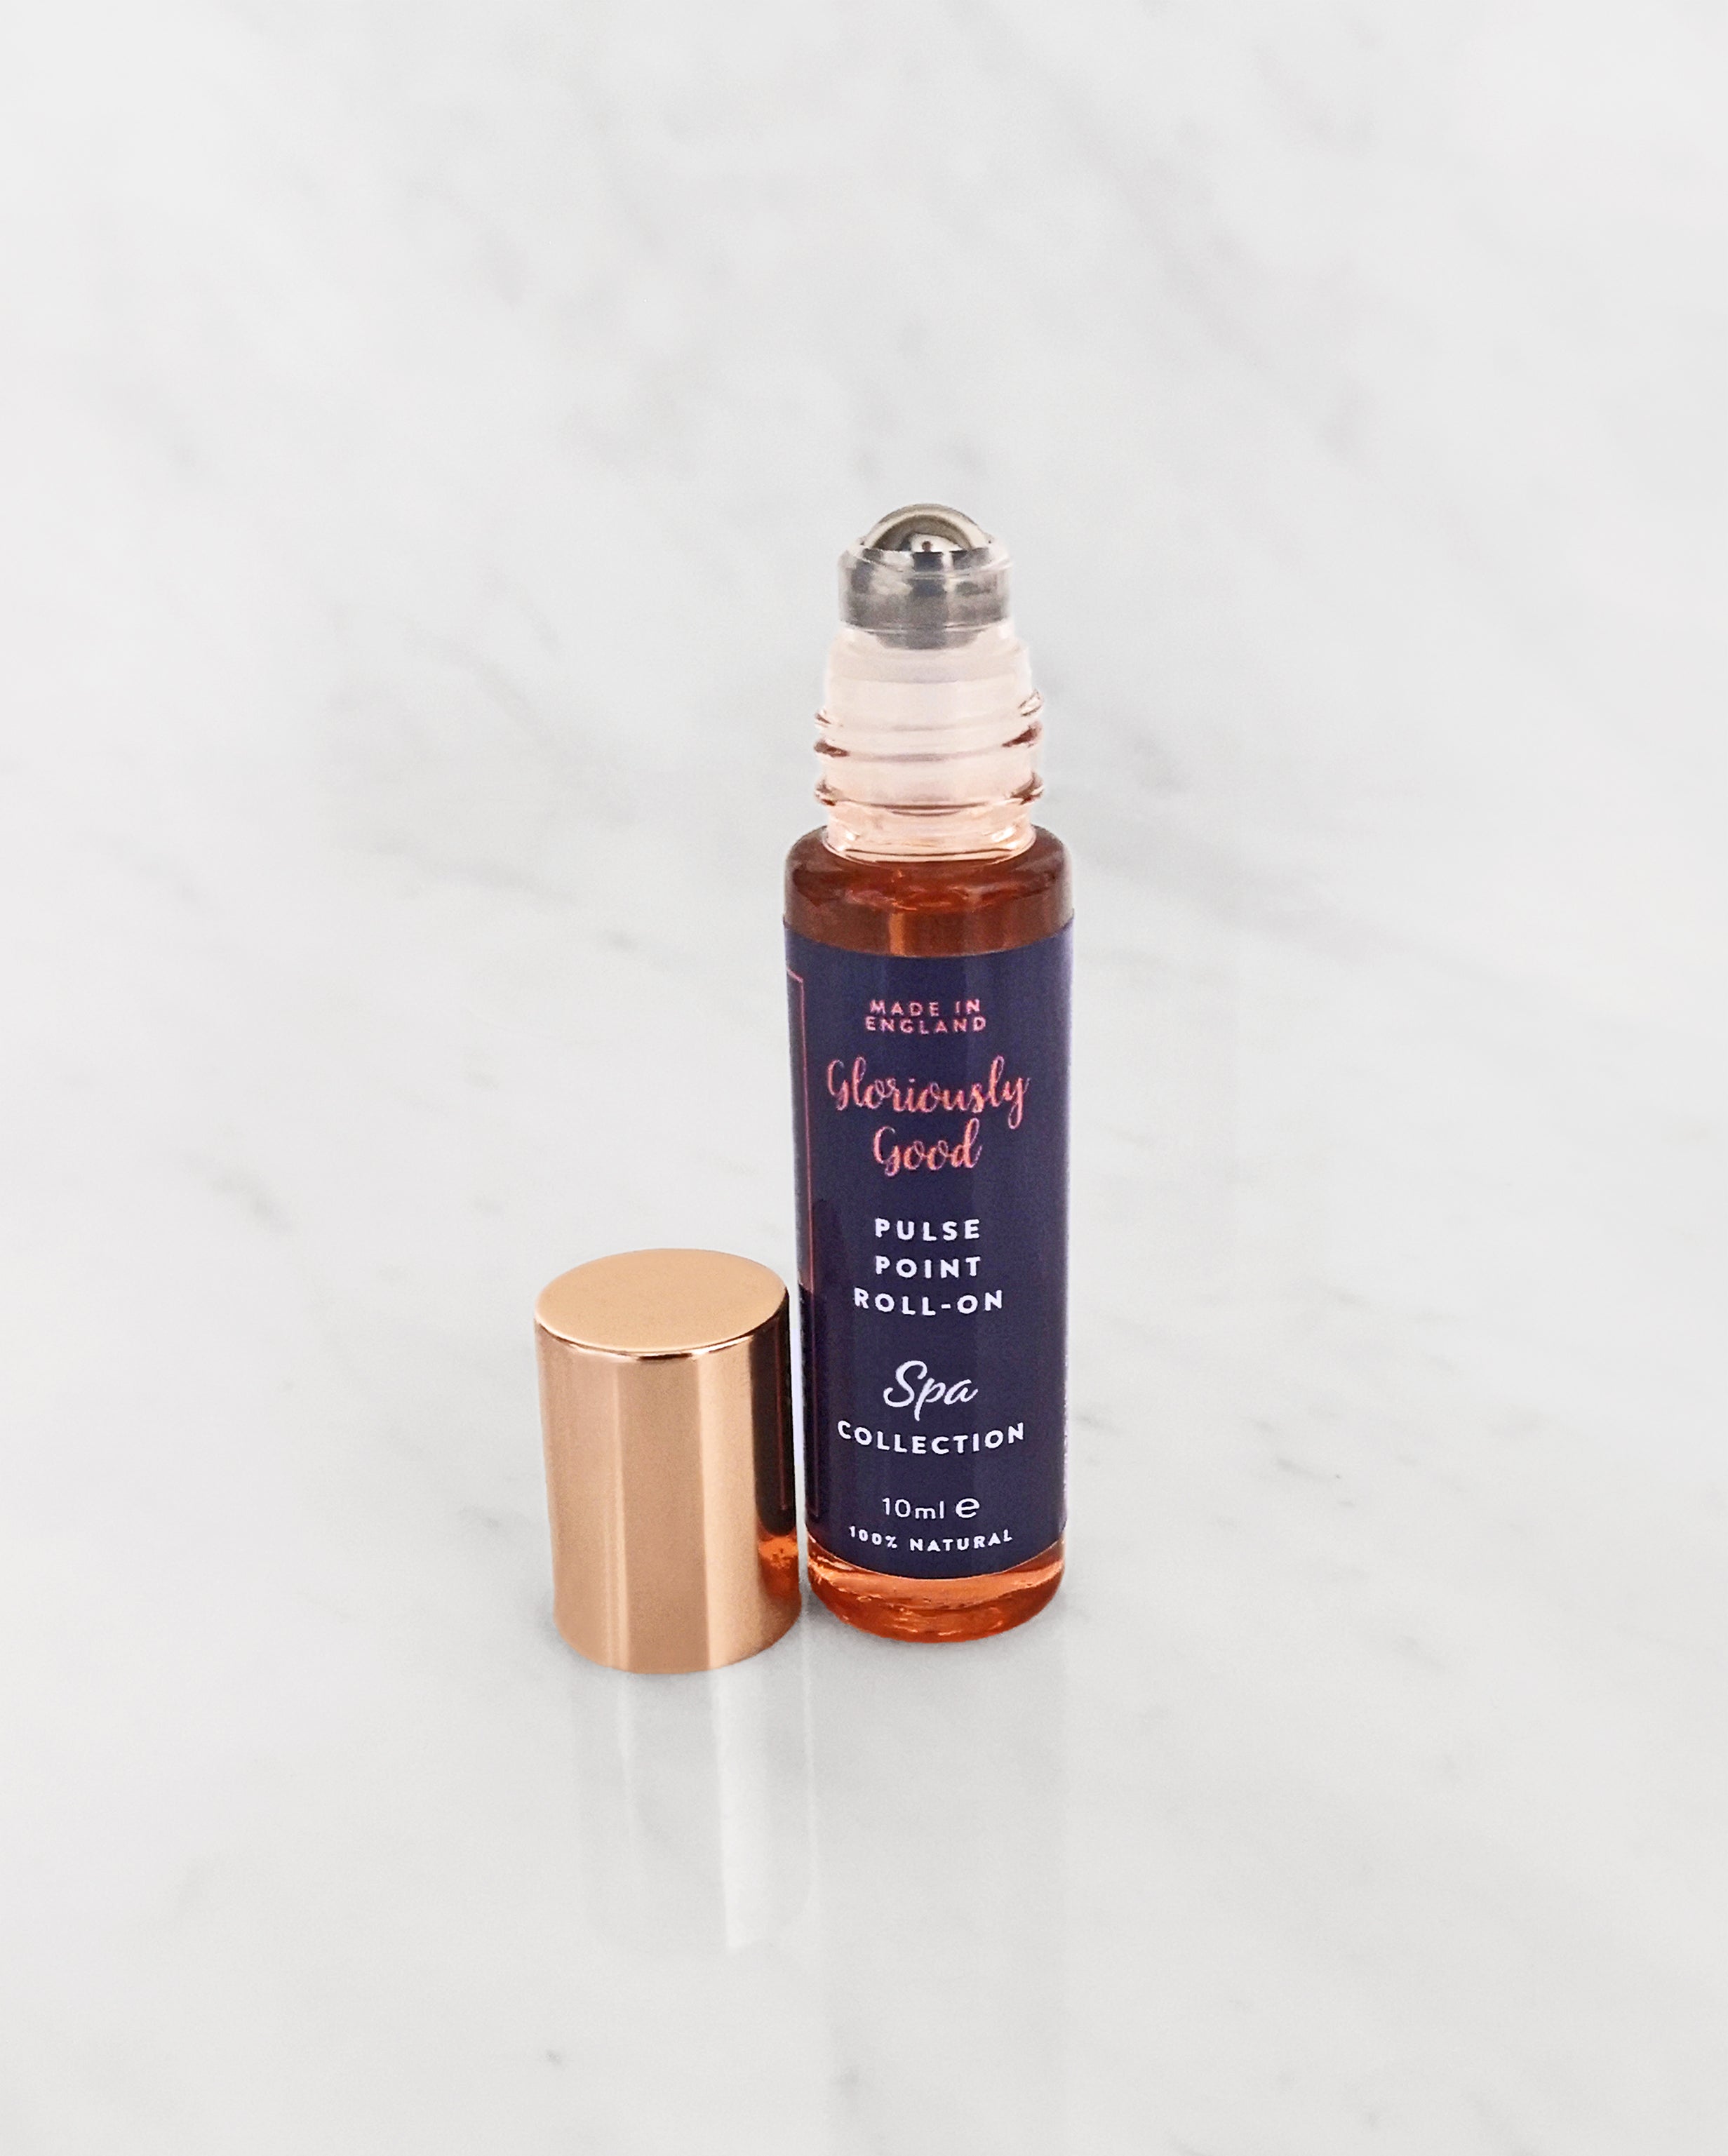 Lavender & Ylang Ylang Pulse Point Roll-on Oil